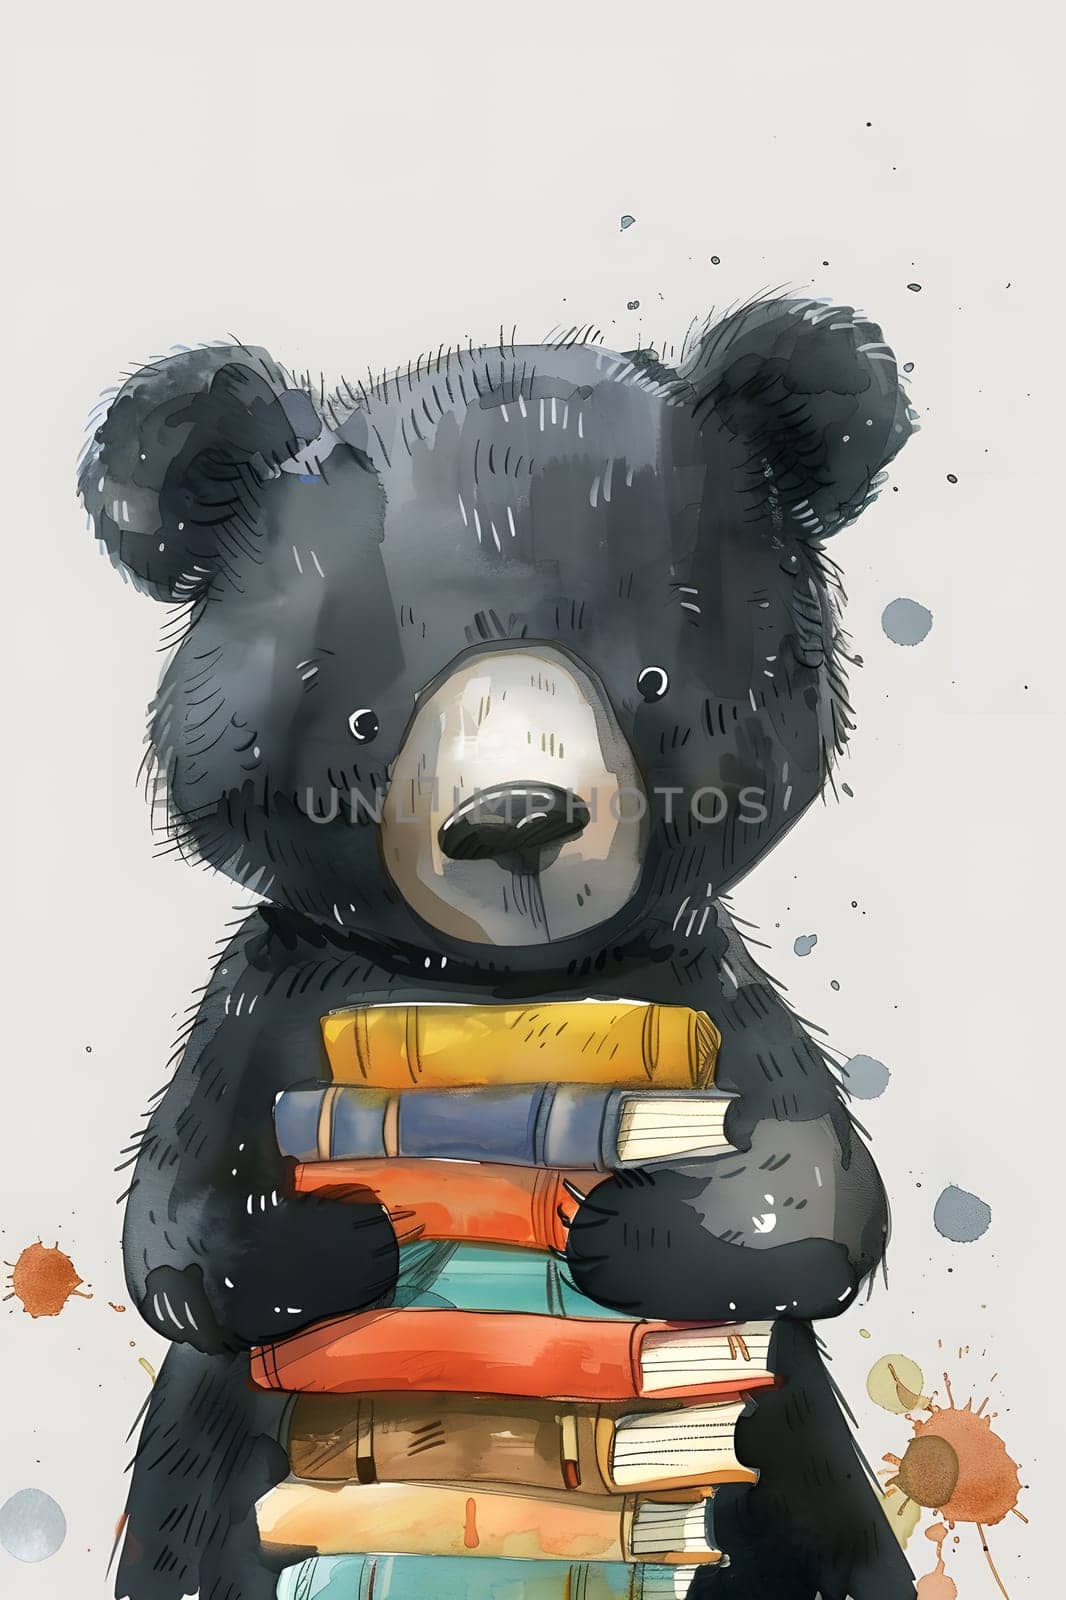 A black bear toy holding a stack of books as a gesture by Nadtochiy